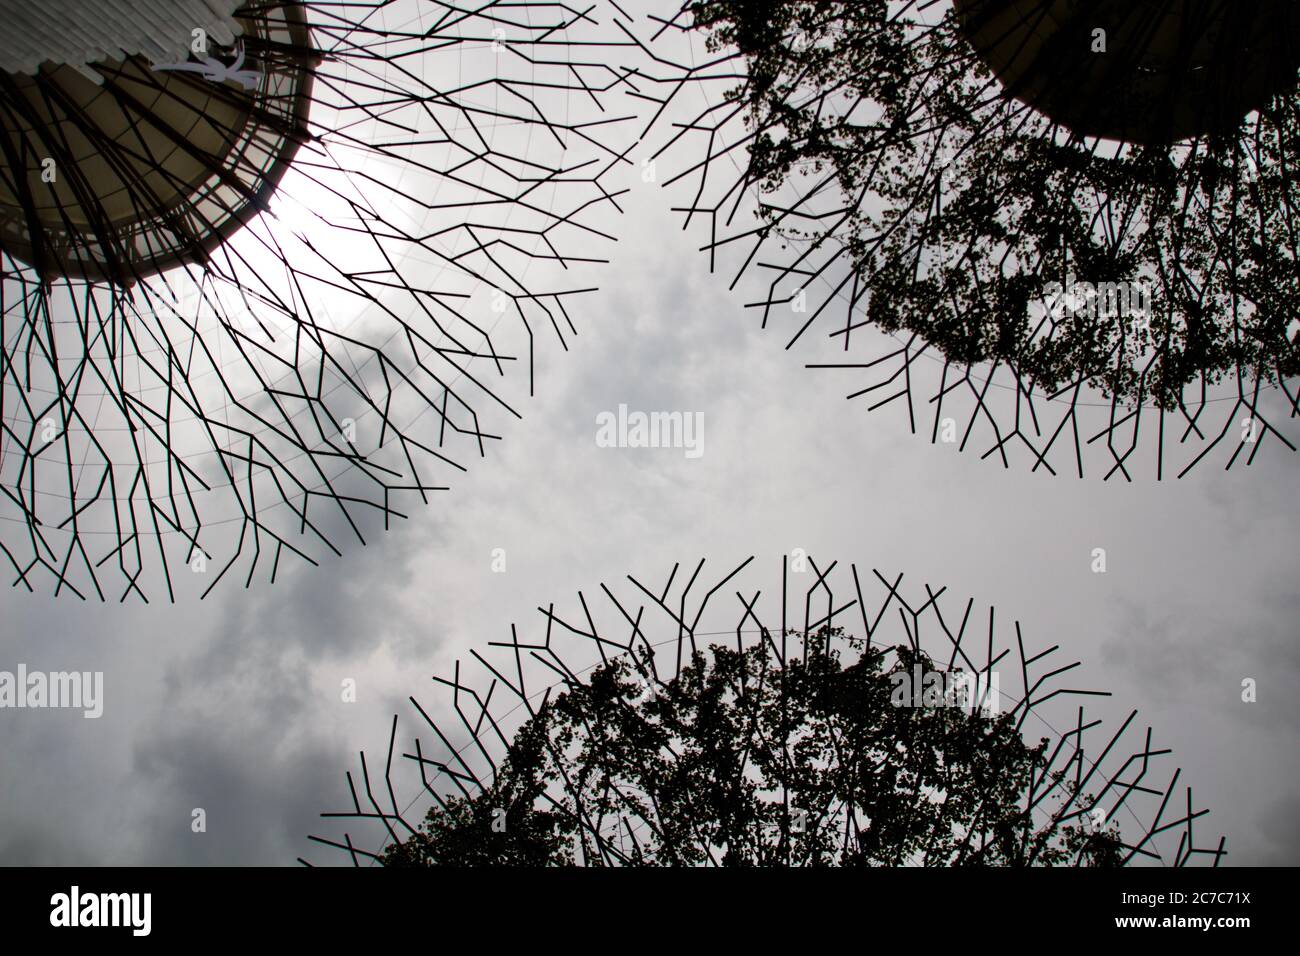 Low shot of metallic tree-like installation in Singapore with grey cloudy sky in the background Stock Photo